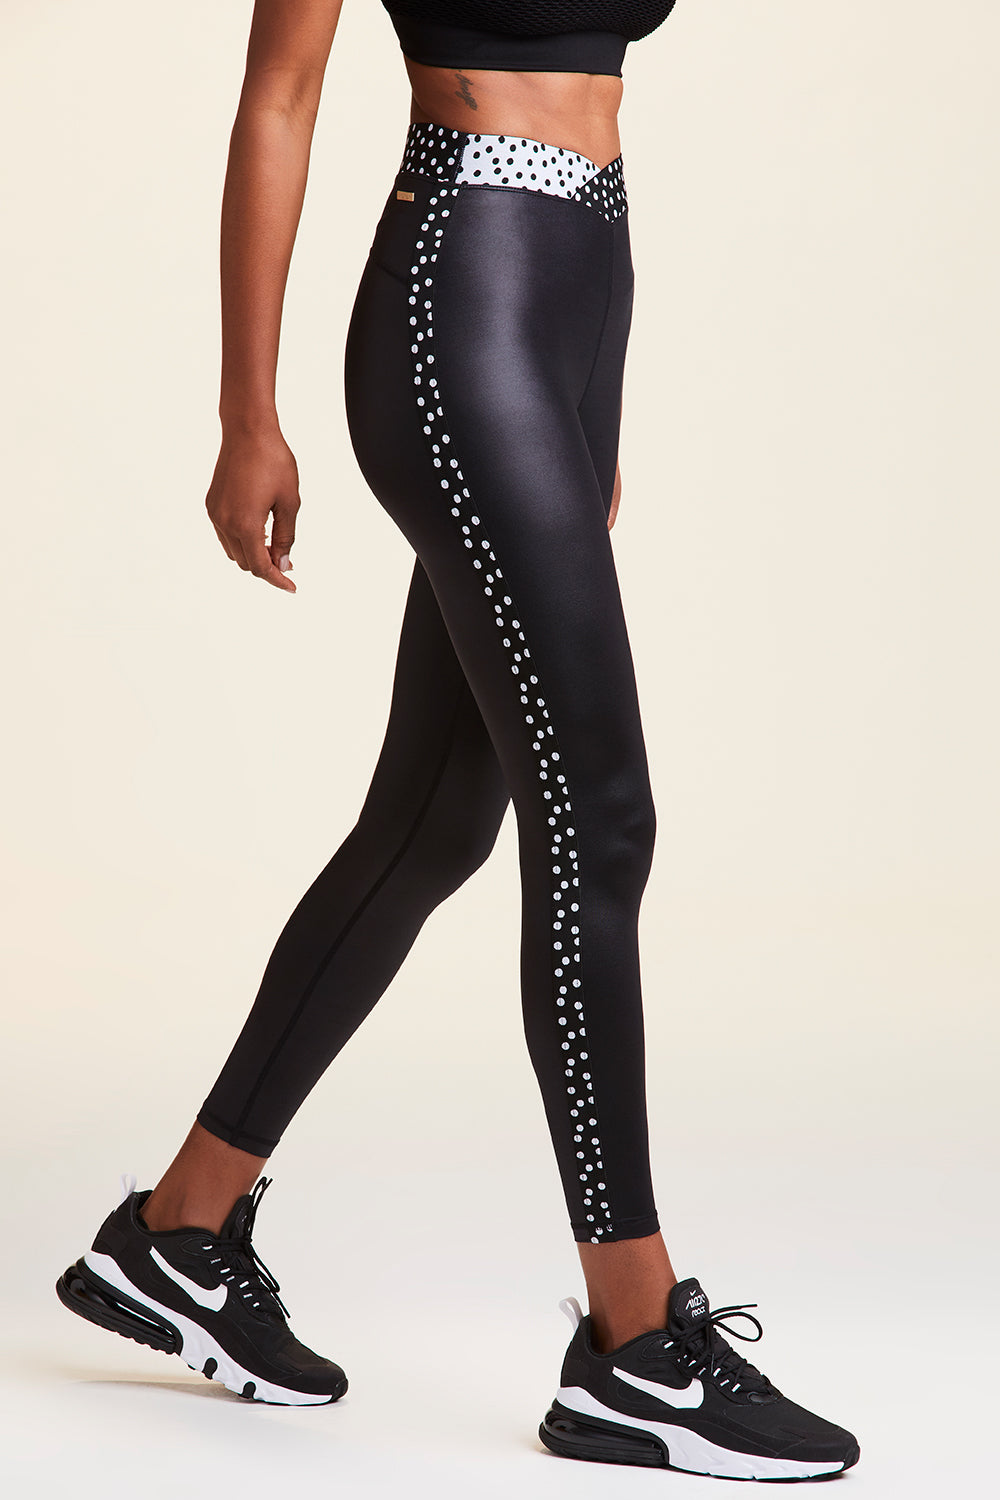 Side view of Alala Women's Luxury Athleisure shiny black tight with black and white polda dot detail on waistband and side seams